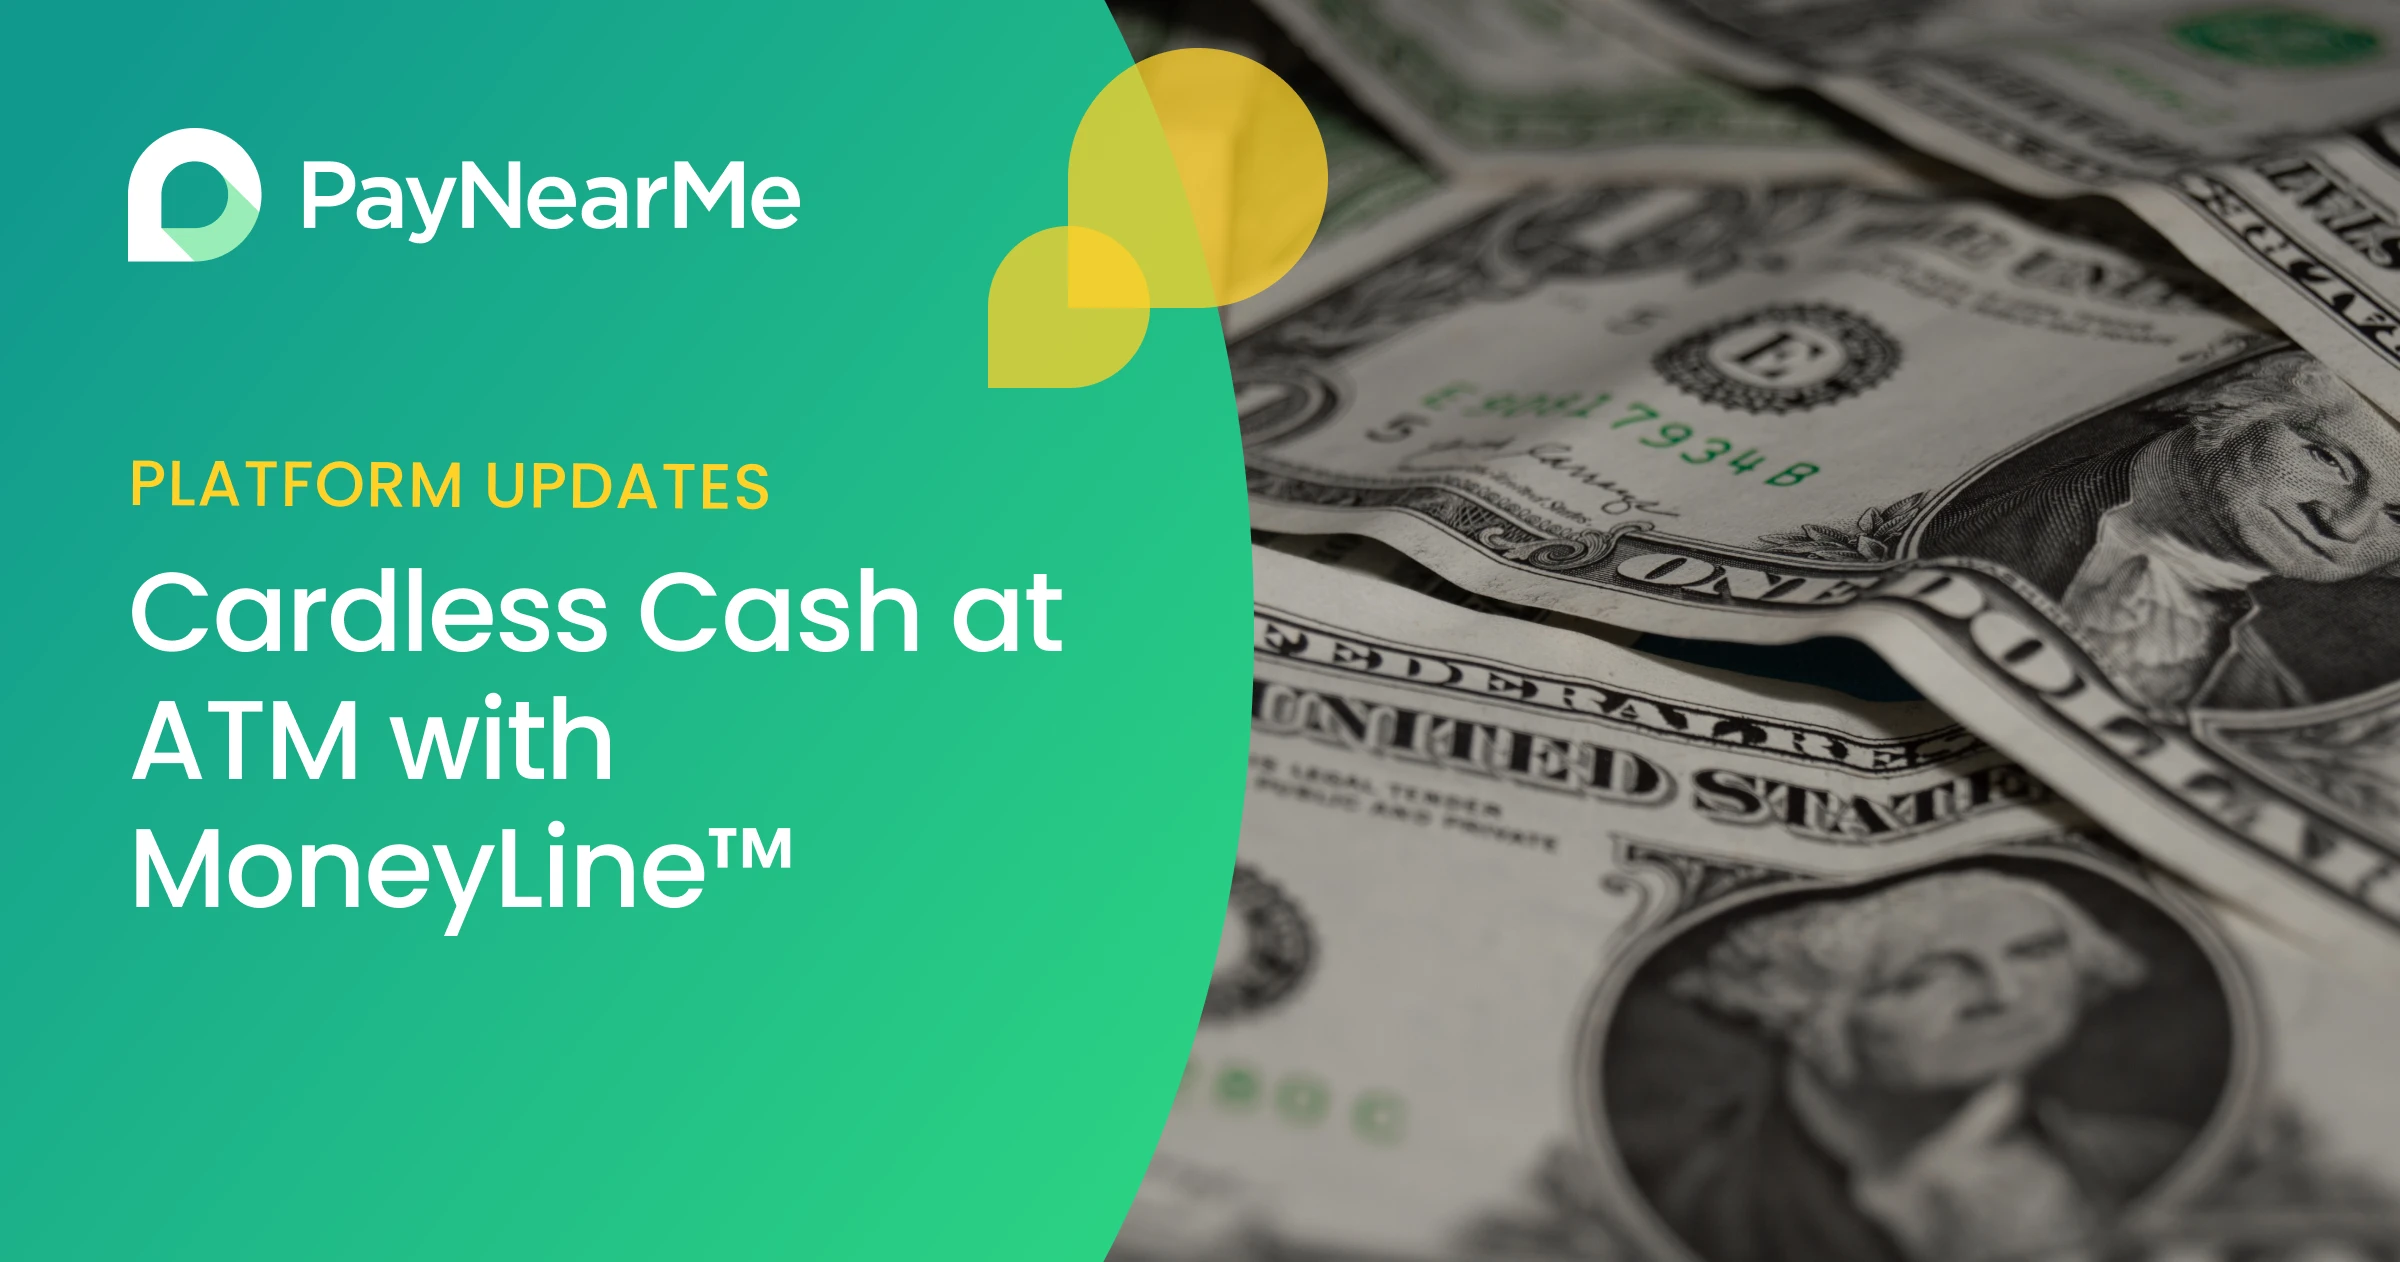 New Feature: Cardless Cash at ATM with MoneyLine™️